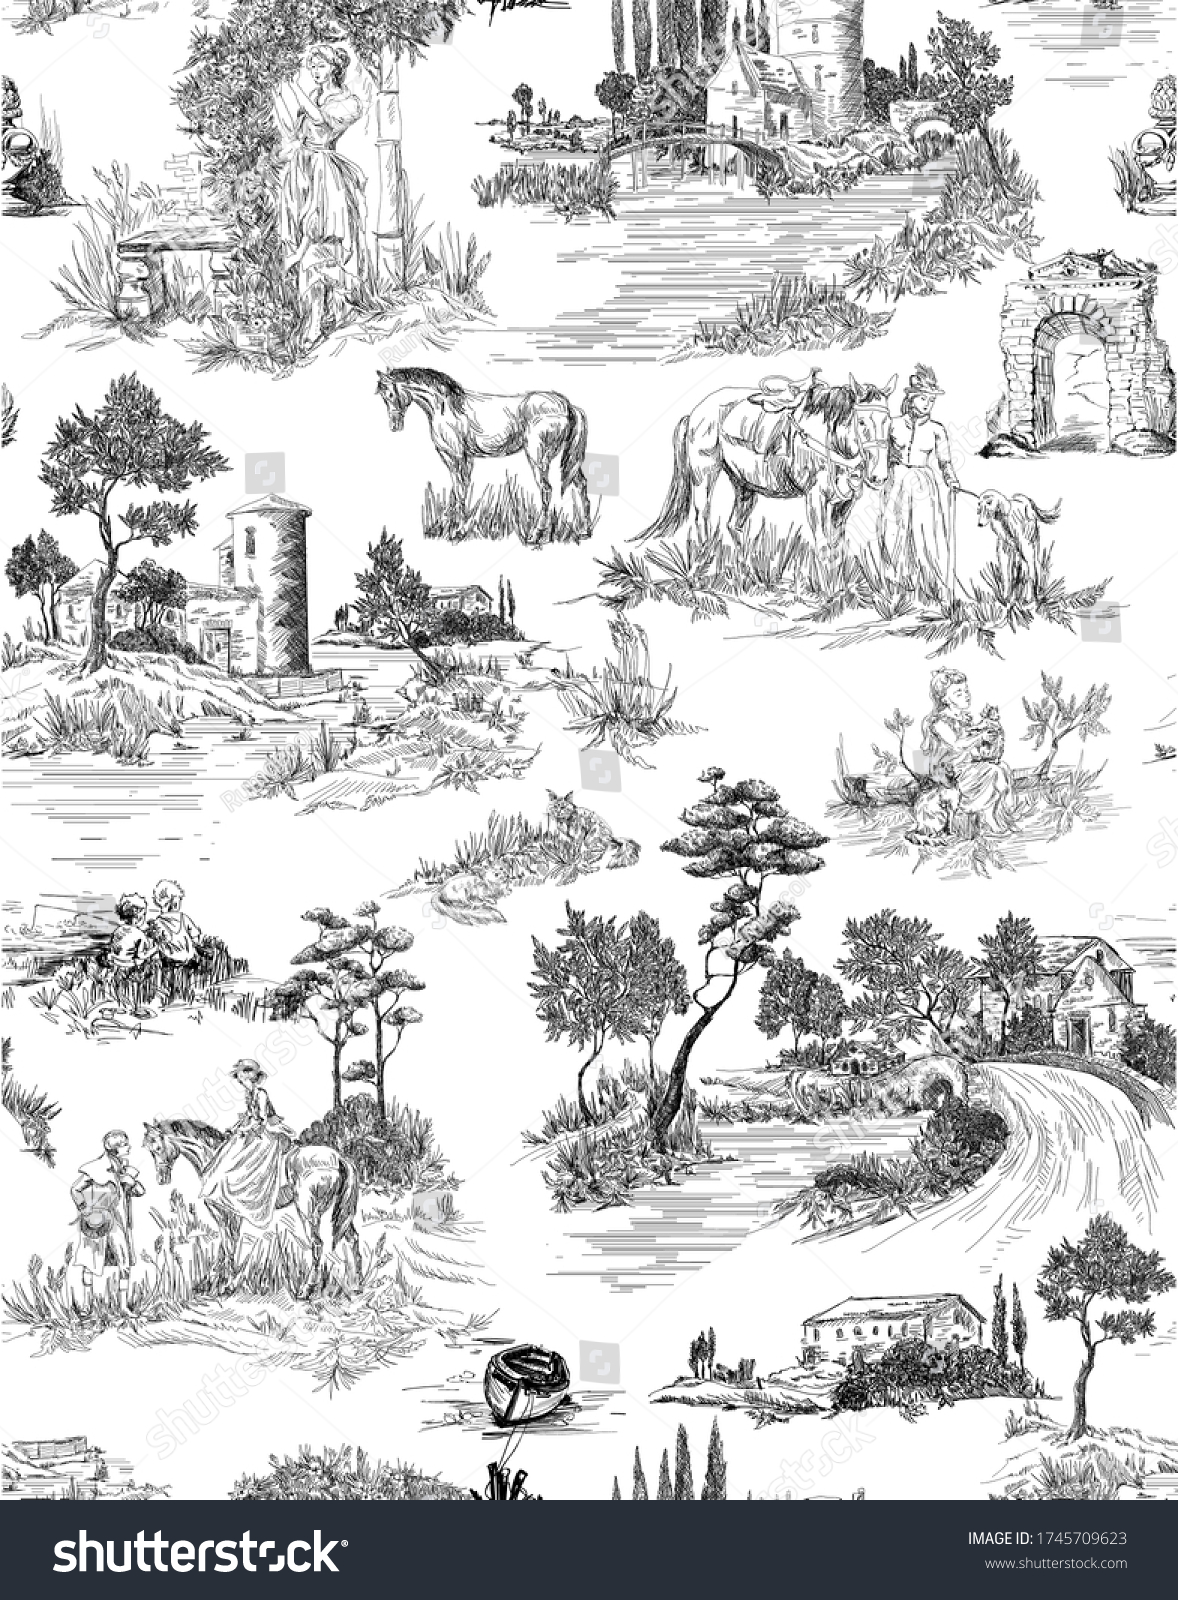 SVG of Toile de jouy pattern with countryside views with castles and houses and landscapes and walking people with animals-pets-horses, cats, dog in black and white color svg